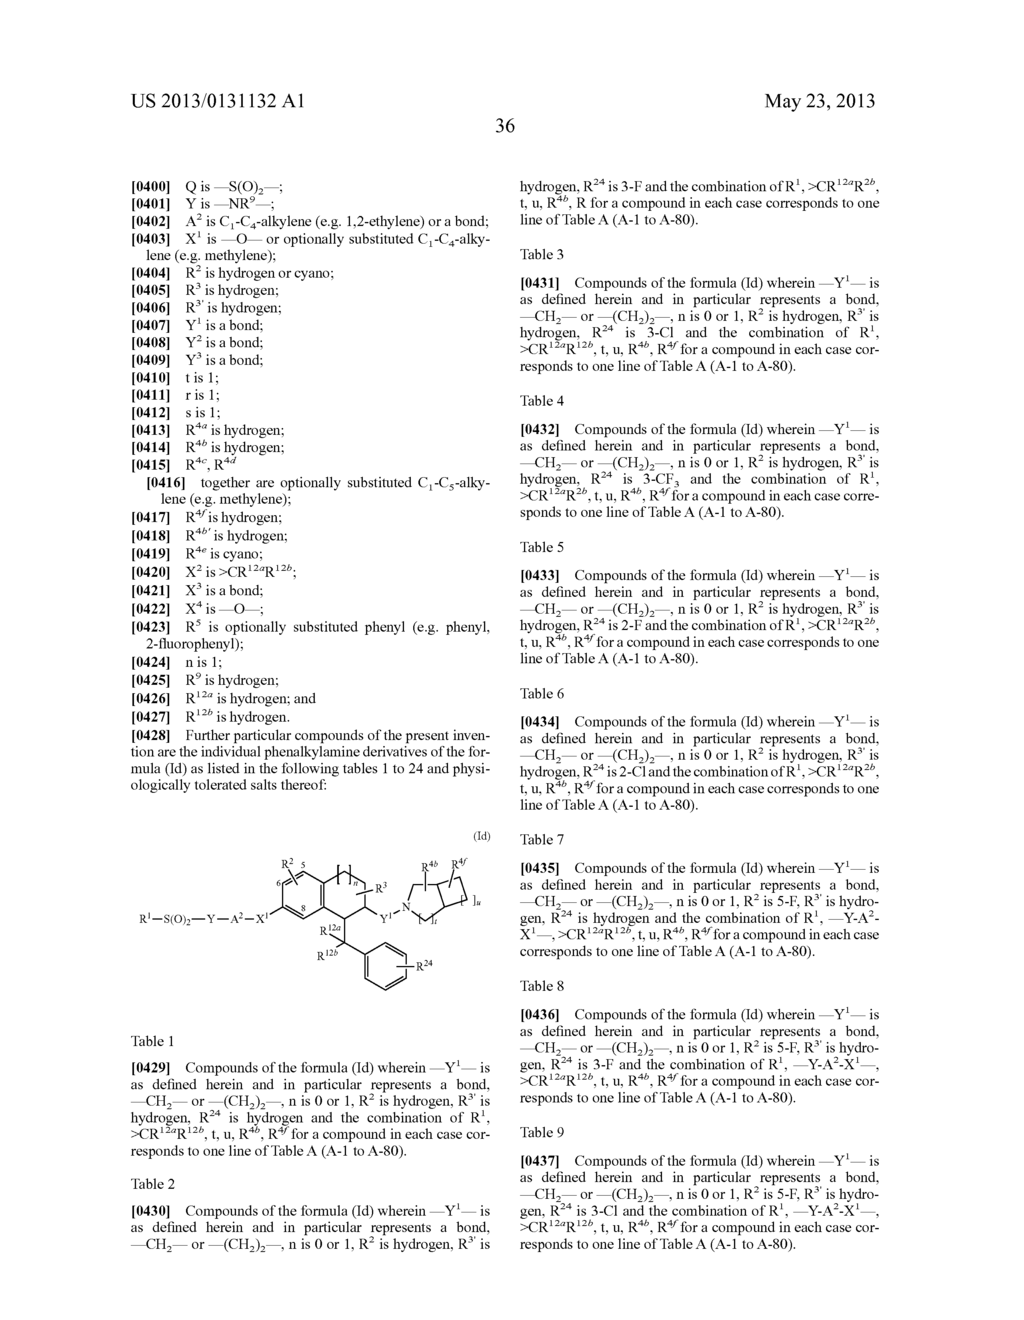 N-SUBSTITUTED AMINOBENZOCYCLOHEPTENE, AMINOTETRALINE, AMINOINDANE AND     PHENALKYLAMINE DERIVATIVES, PHARMACEUTICAL COMPOSITIONS CONTAINING THEM,     AND THEIR USE IN THERAPY - diagram, schematic, and image 37